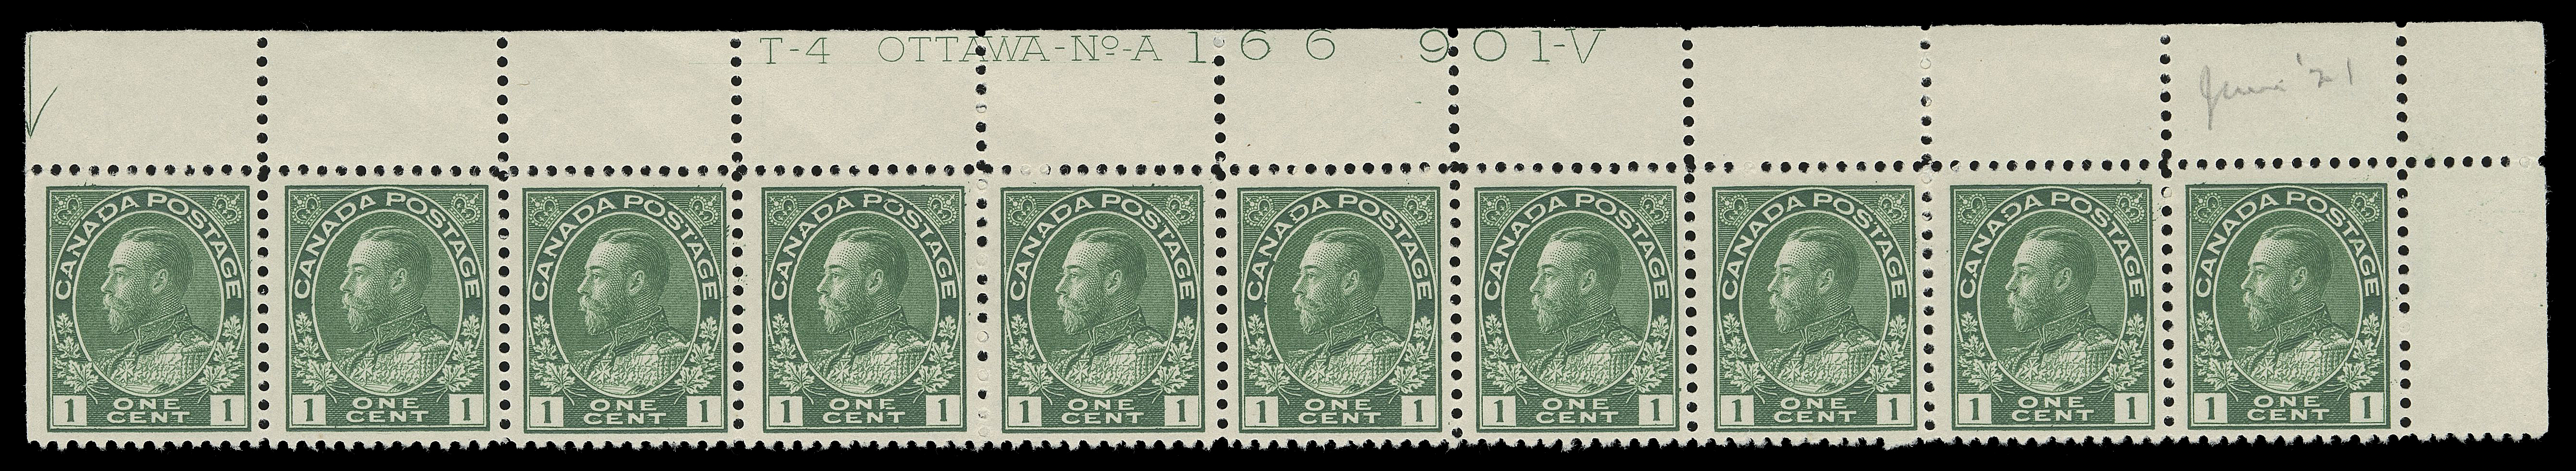 ADMIRAL STAMPS  104ii,Matching UR Plate 165 & 166 strips of ten with printing order number "901-V", distinctive rich shade on fresh wove paper, reasonably to well centered, both LH in selvedge leaving stamps NH; the sole recorded plate multiples recorded for these plate numbers per the Glen Lundeen census on the BNAPS website, F-VF (Unitrade cat. $1,900)